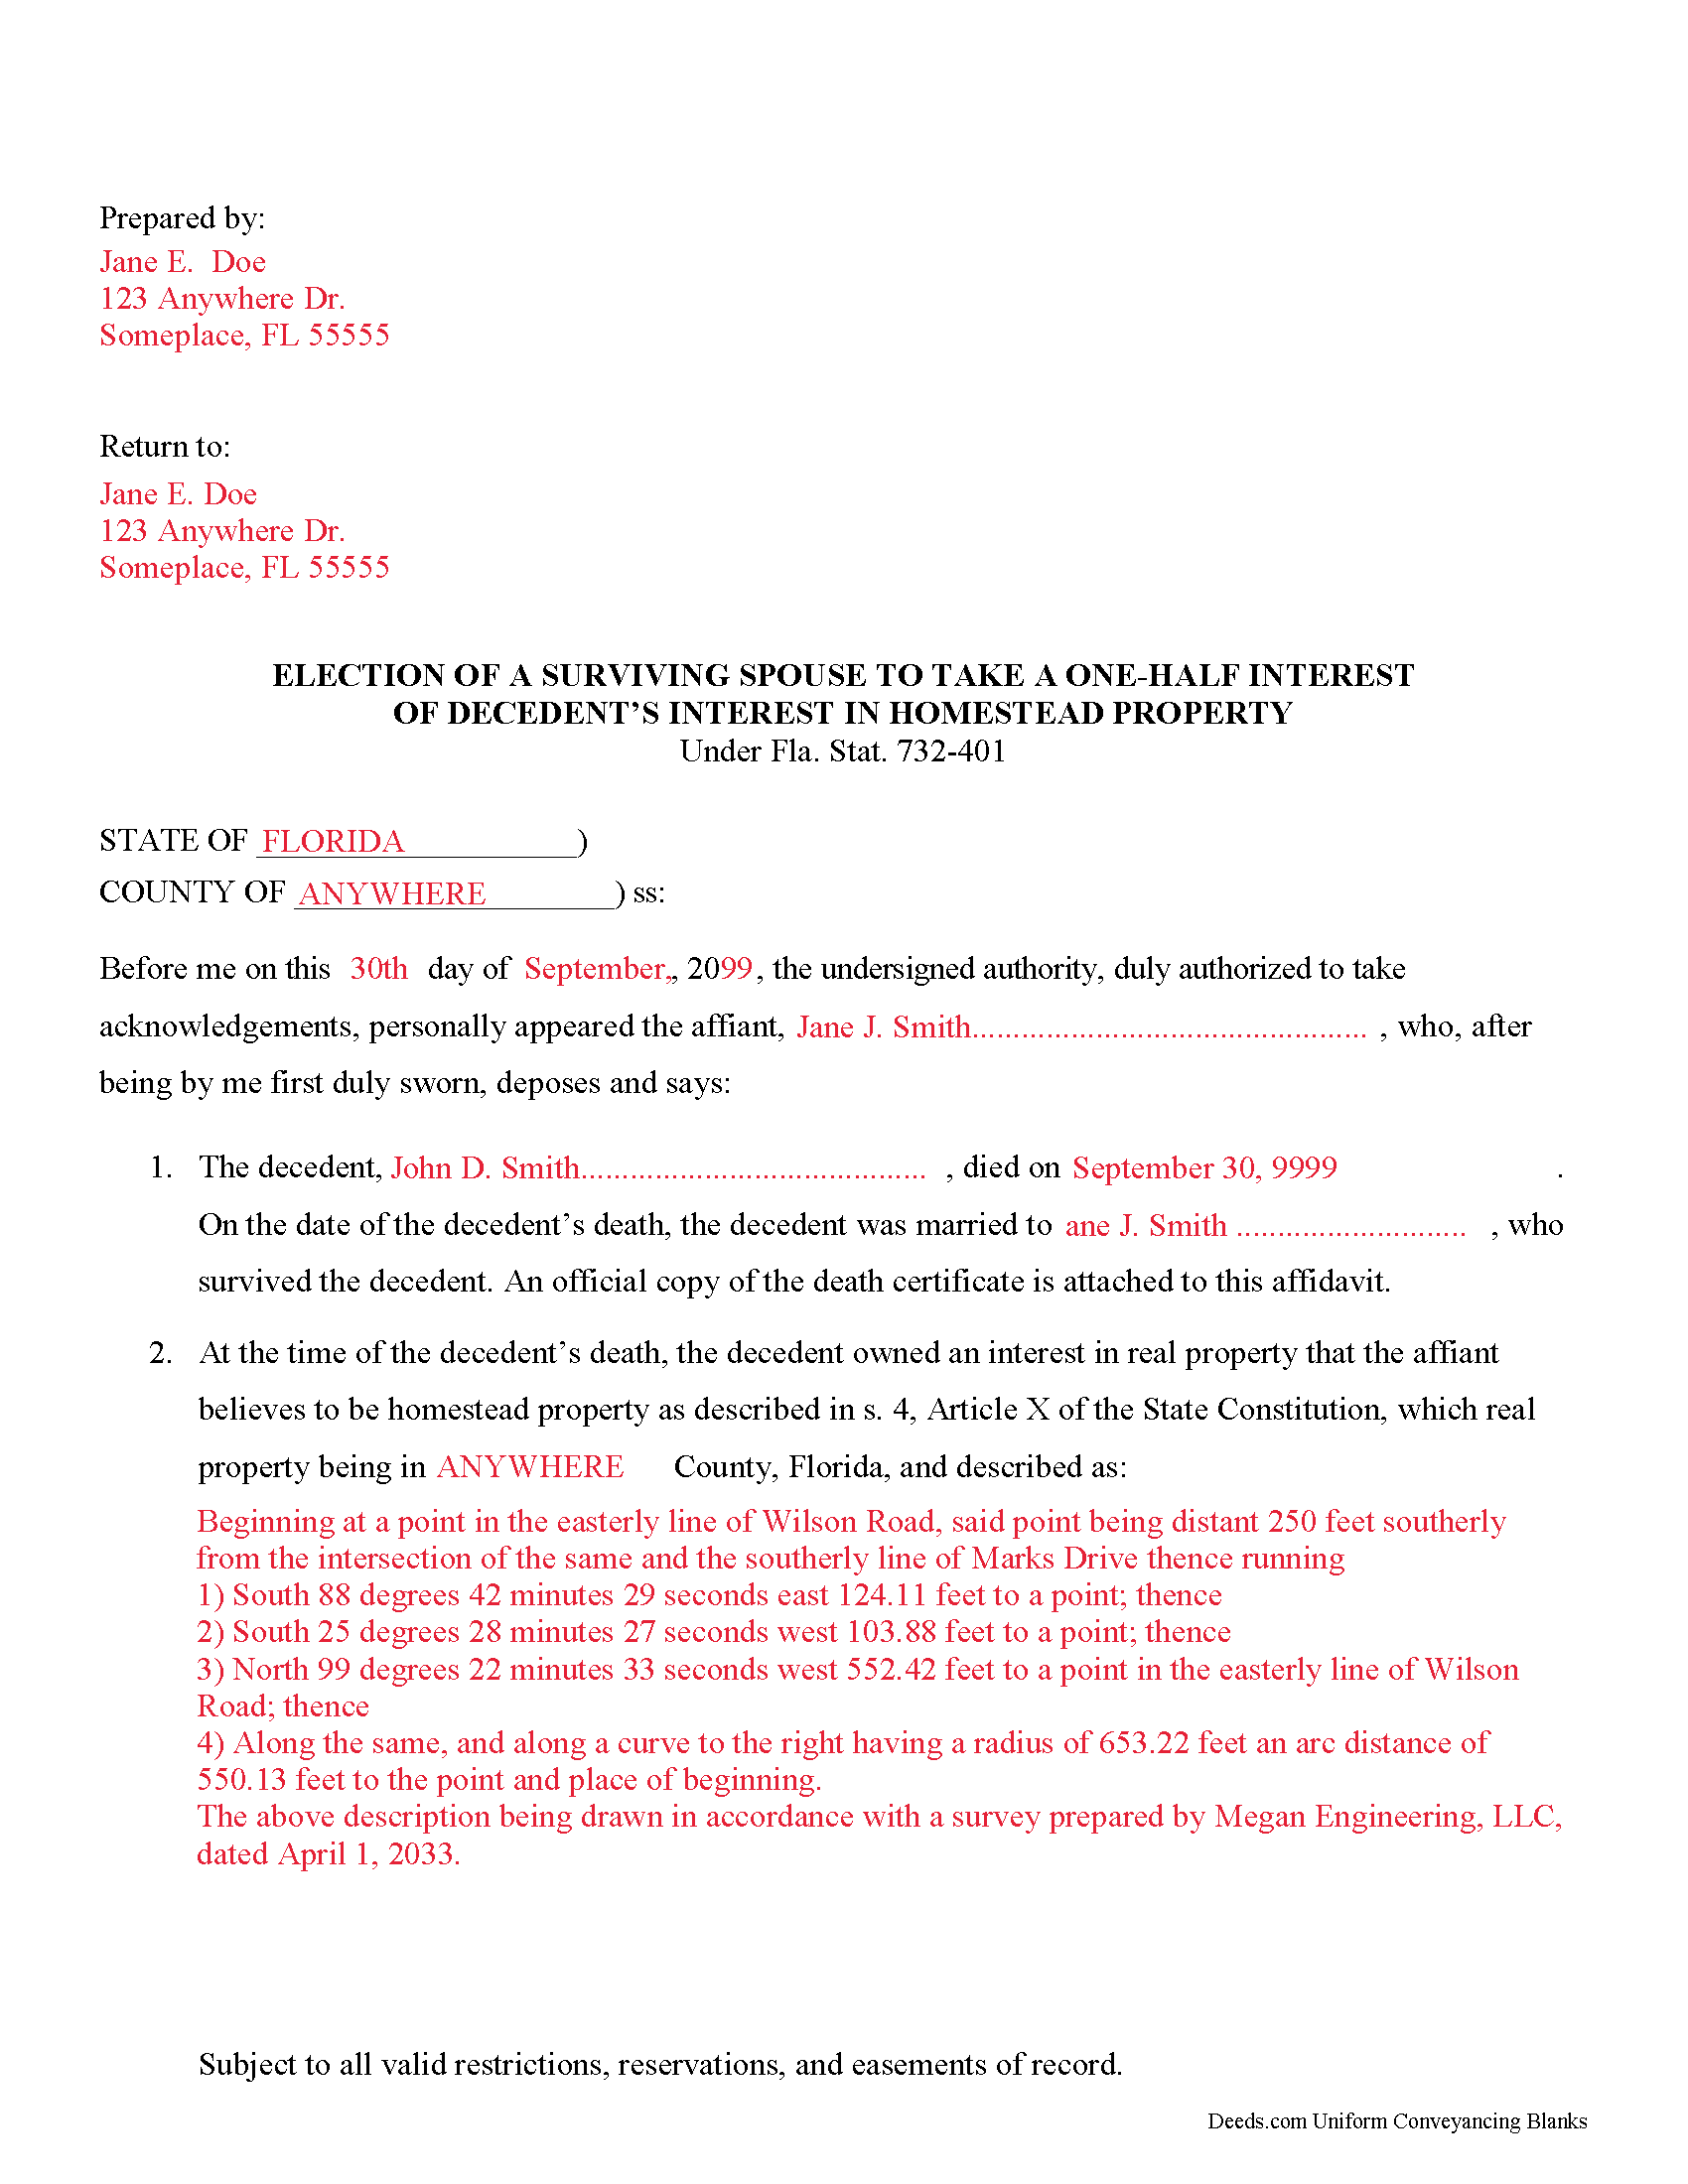 Completed Example of the Decedent Interest in Homestead Affidavit Document